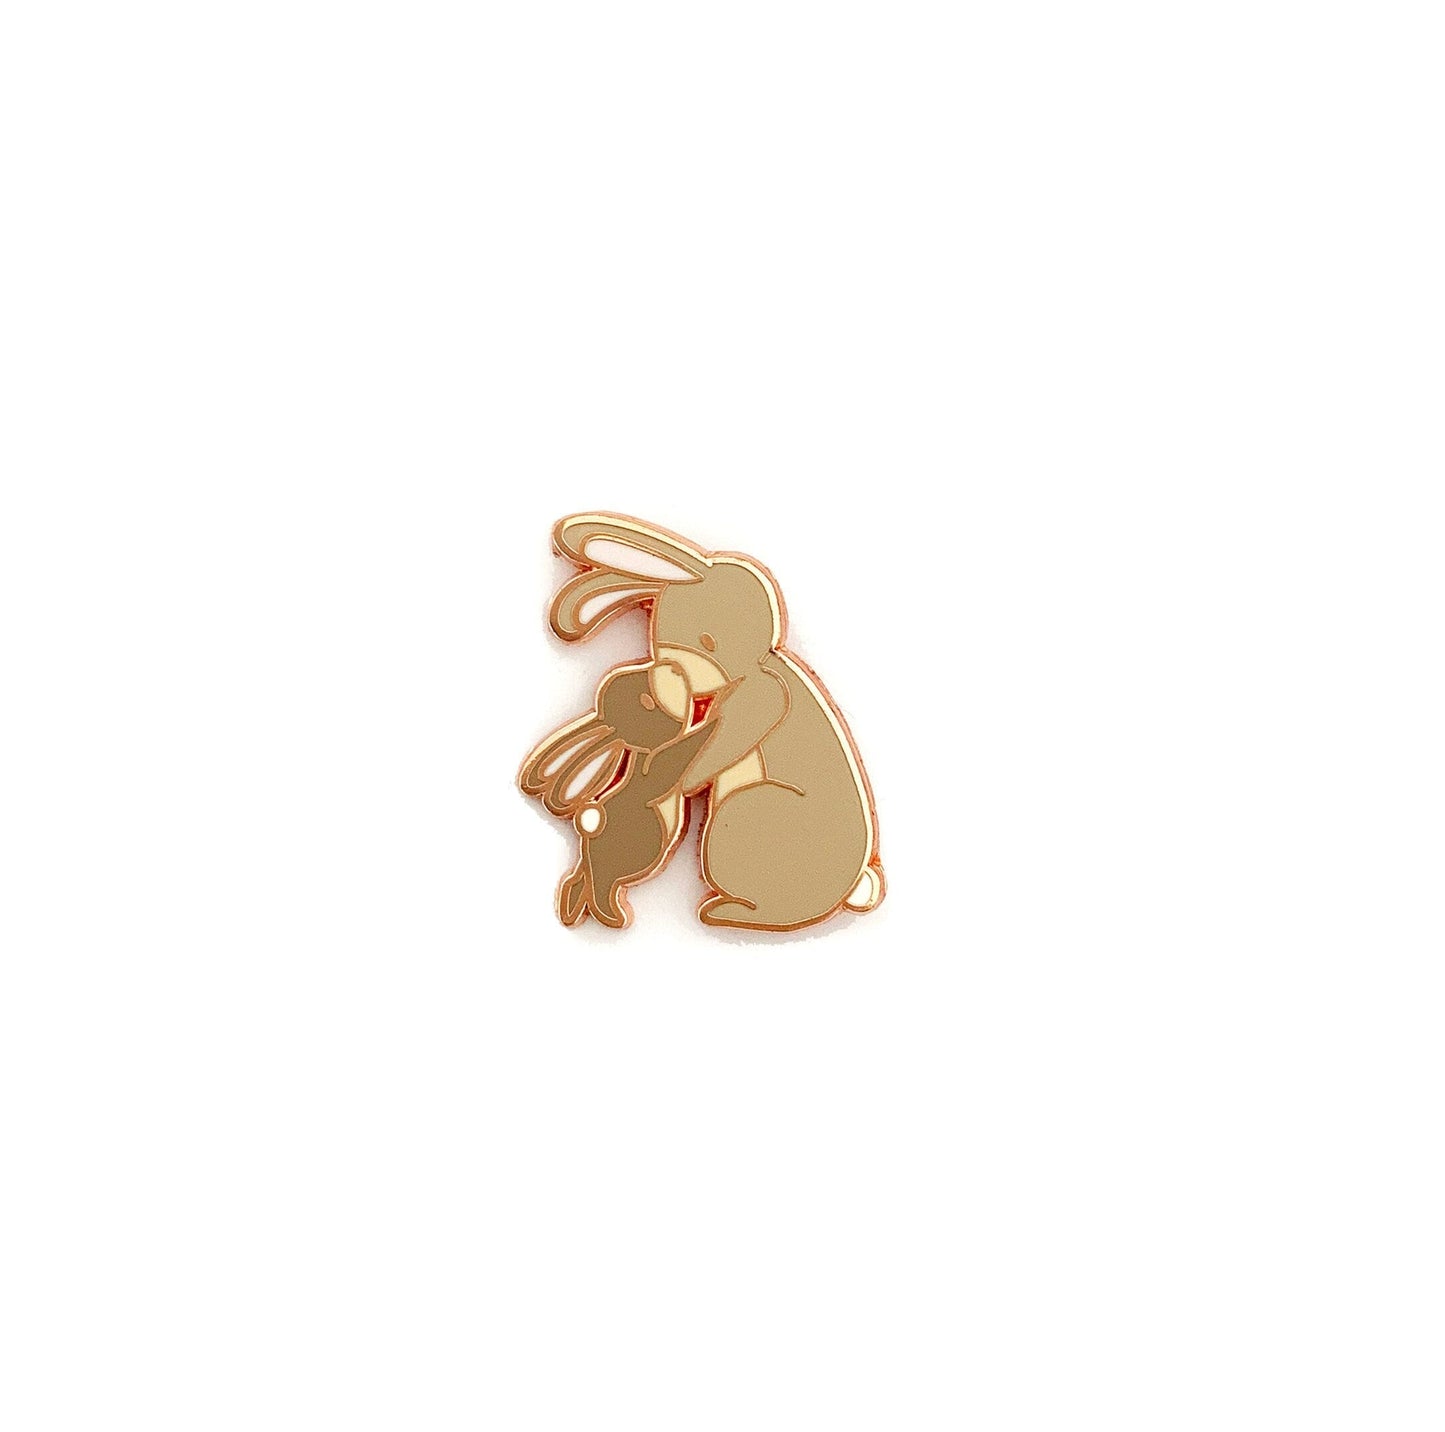 Mother & Baby Bunny - Enamel Pin Set of 5, Mother’s Day Gift, Pins, Brooches & Lapel Pins